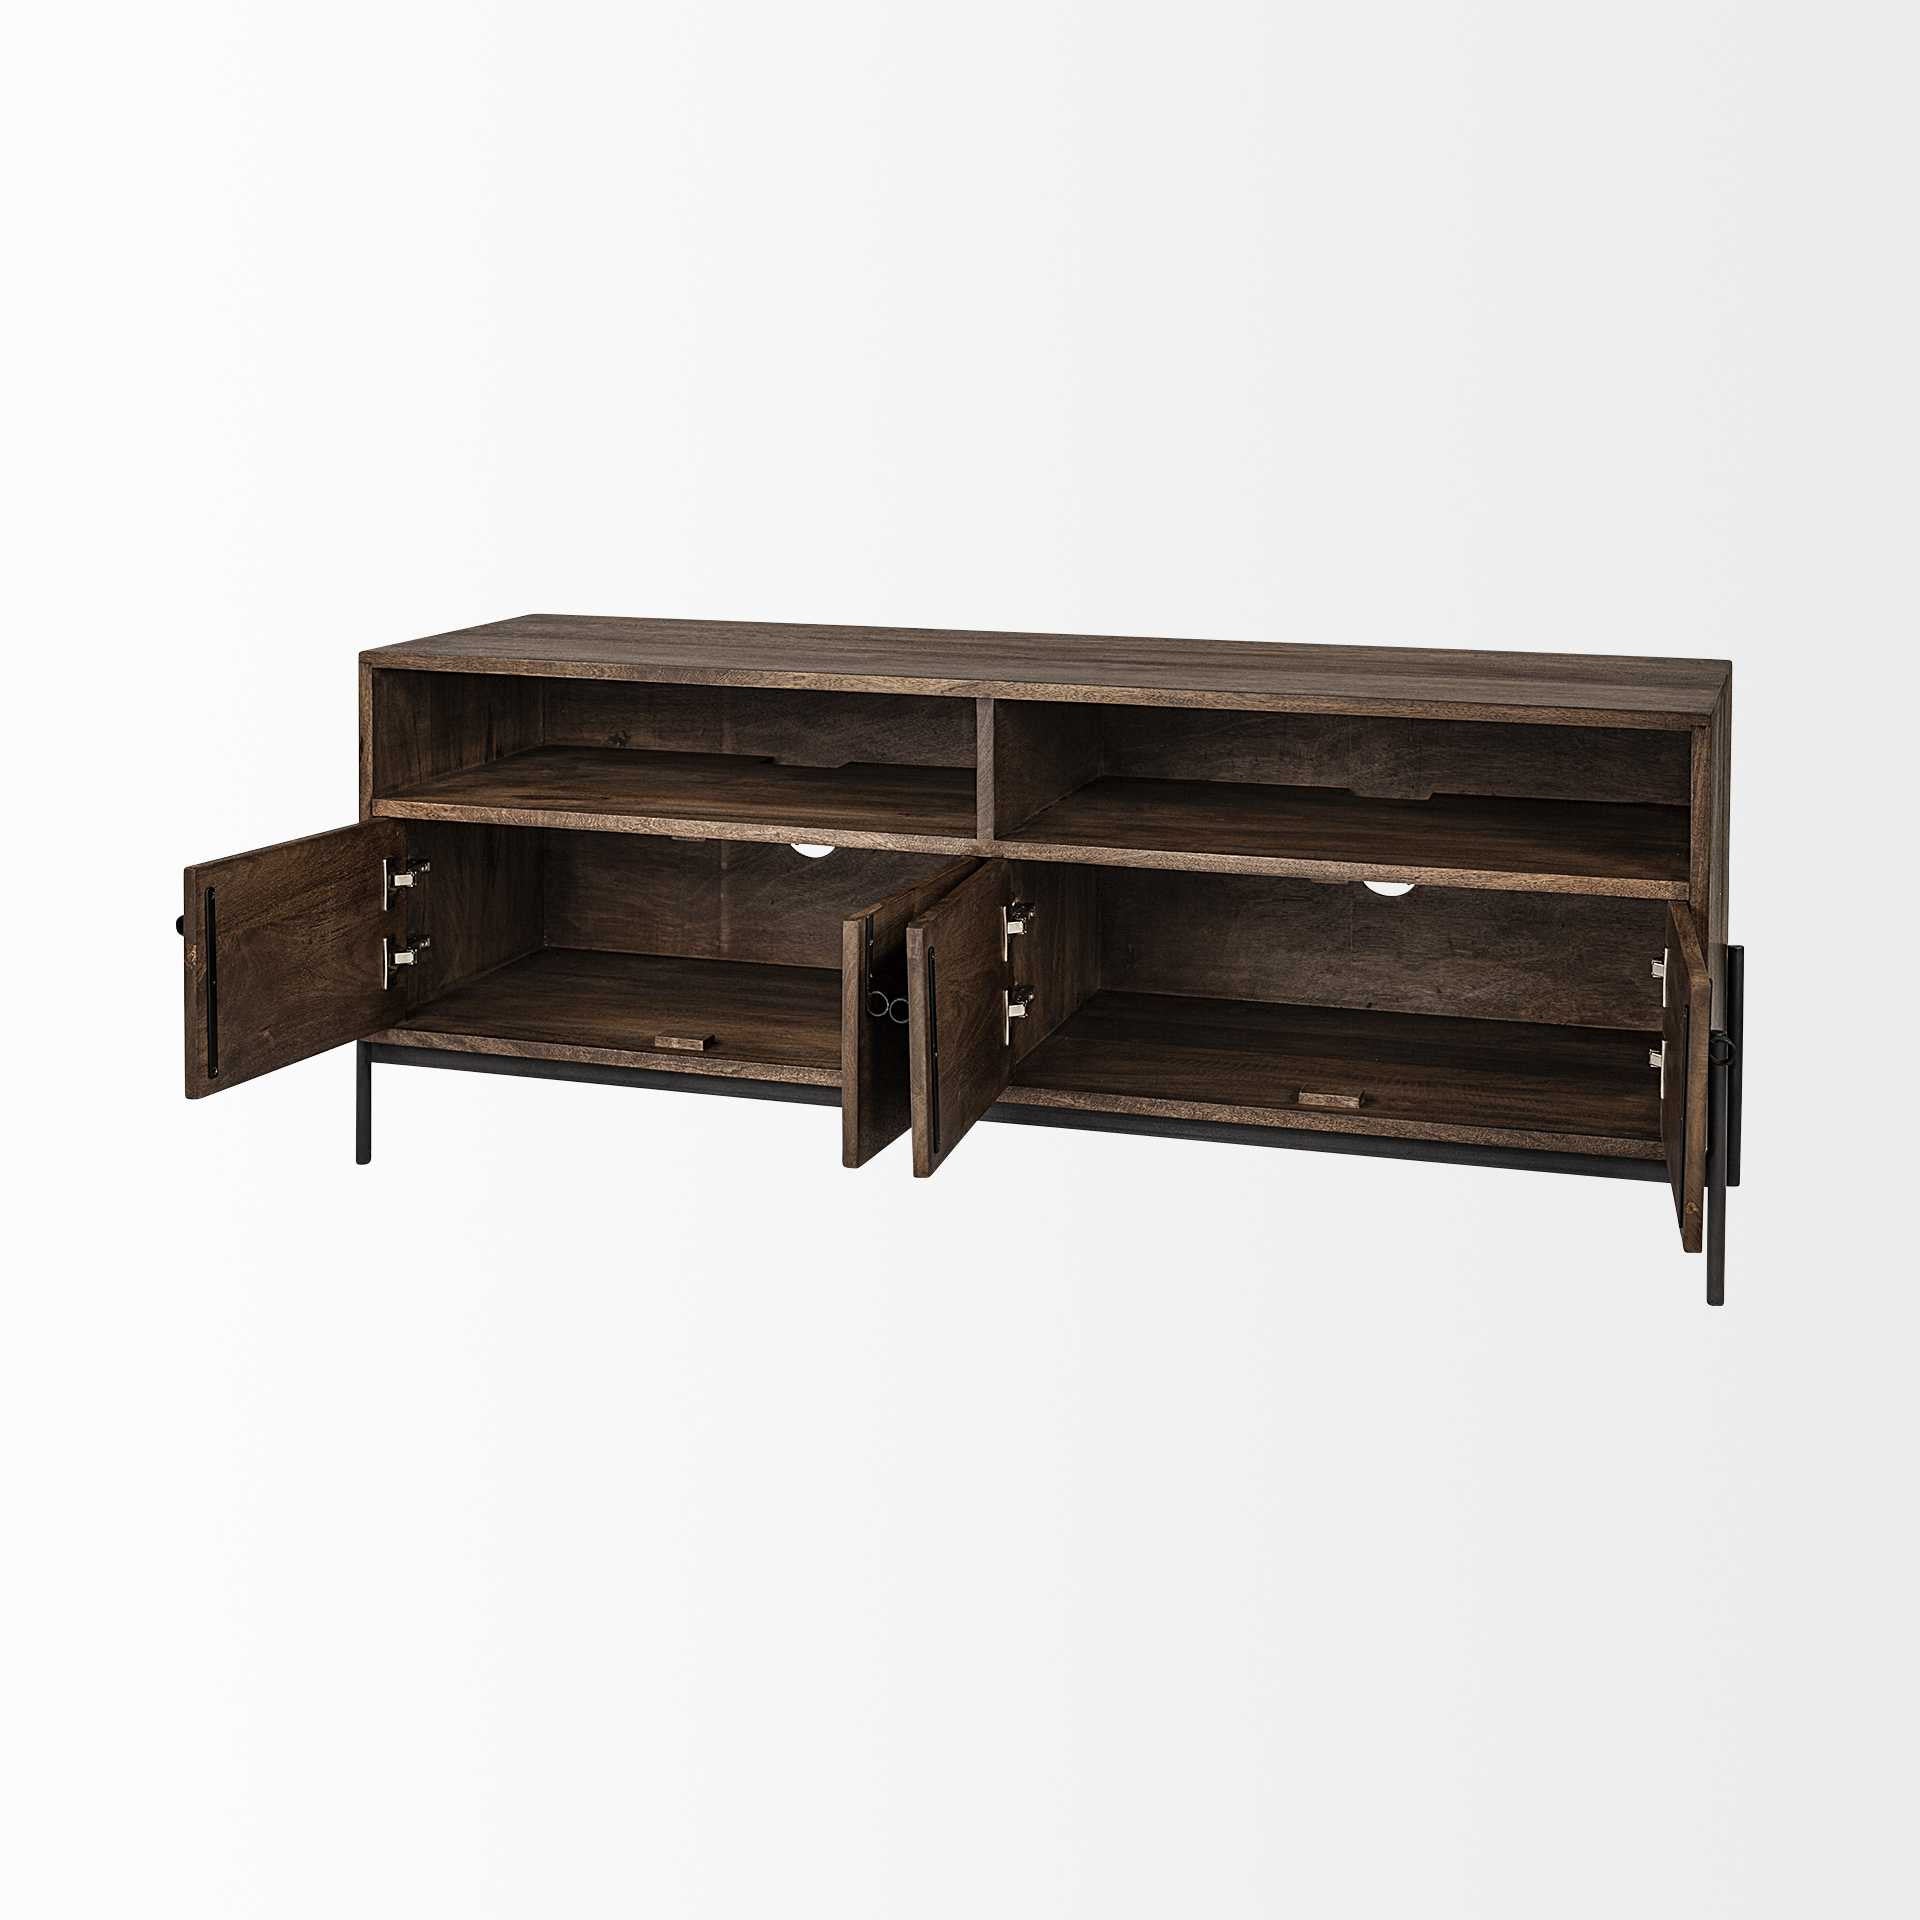 Medium Brown Mango Wood Finish TV Stand Media Console With 4 Doors And 2 Open Shelves